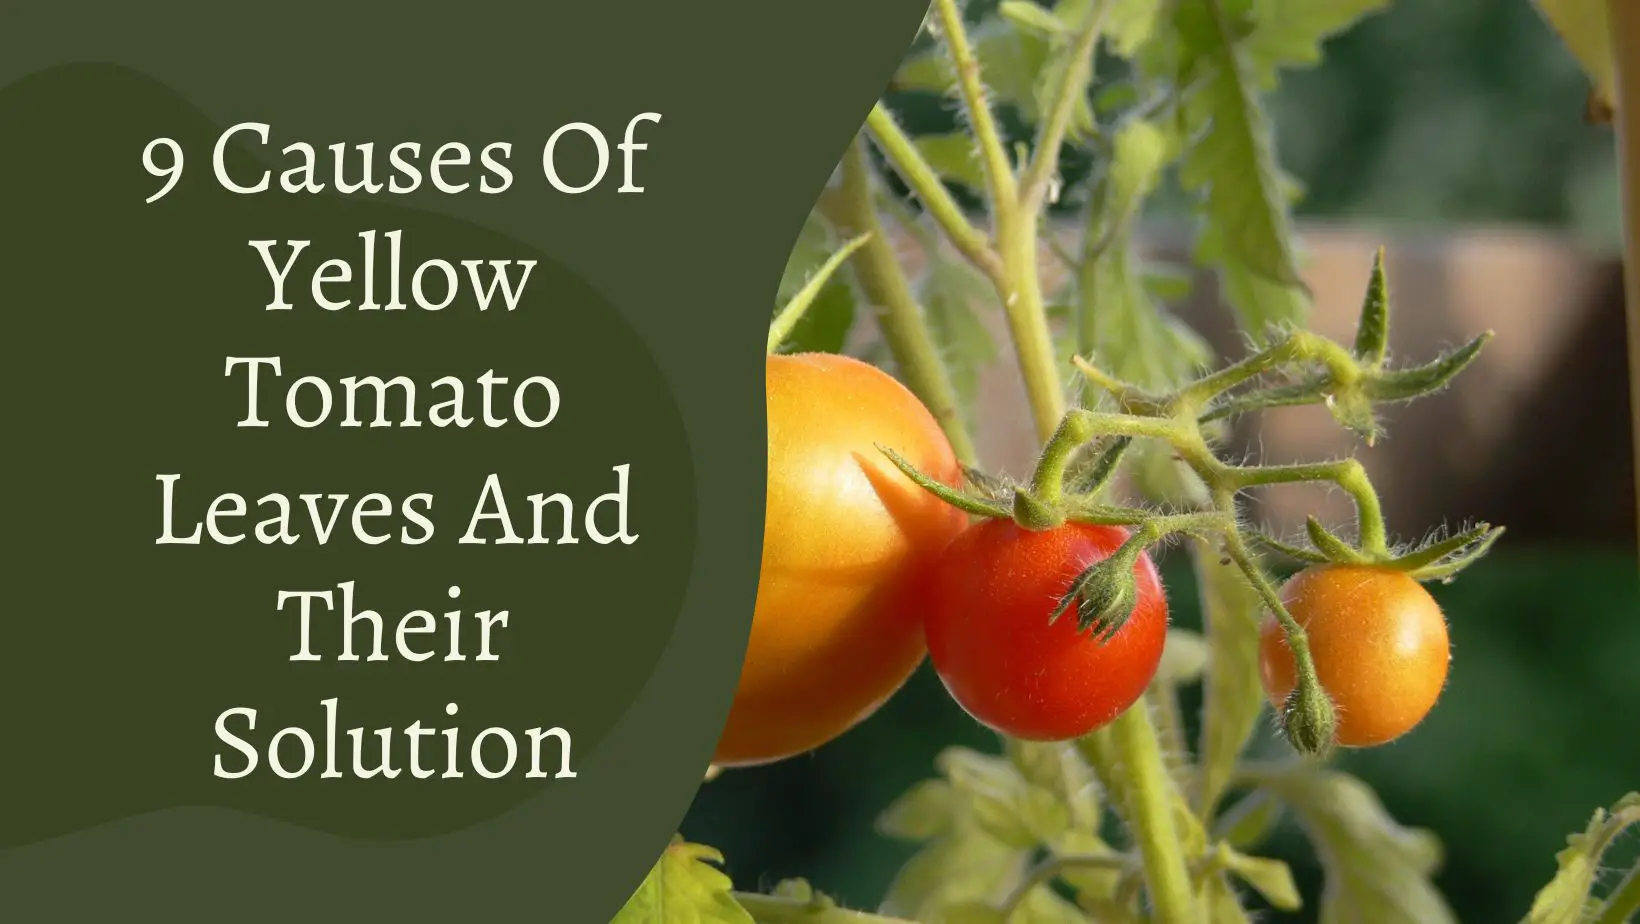 9 Causes Of Yellow Tomato Leaves And Their Solution